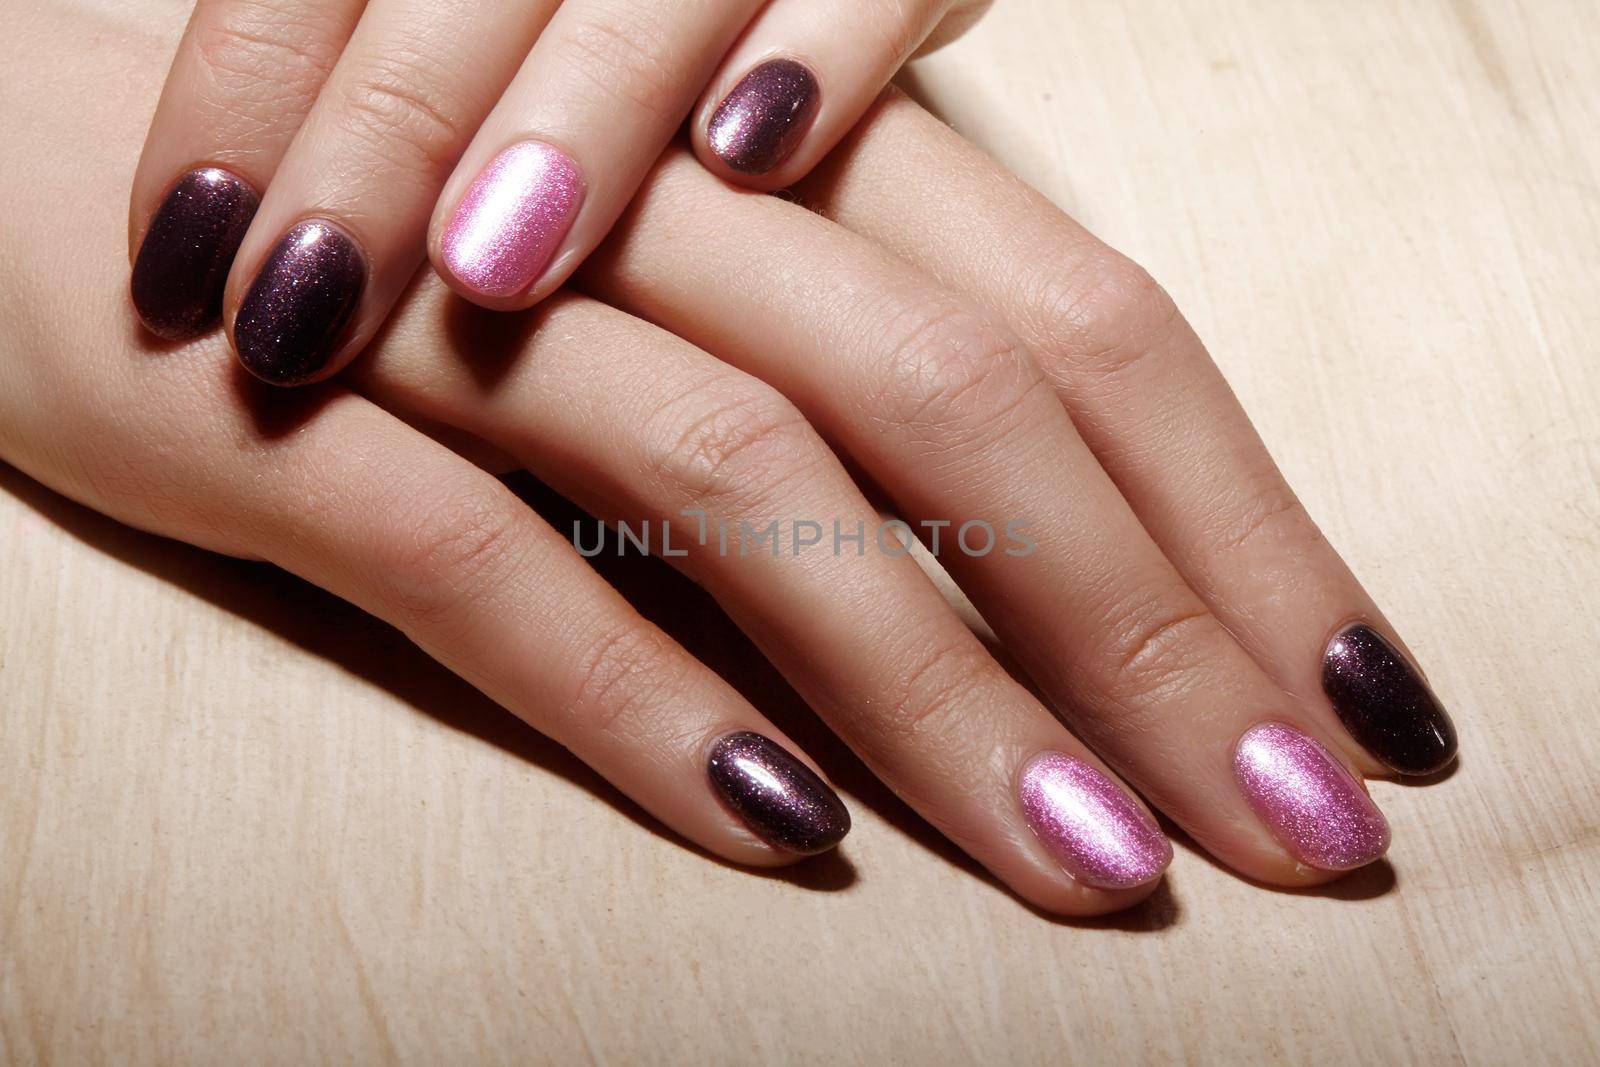 Manicured nails with shiny nail polish. Manicure with bright nailpolish. Fashion art manicure with shiny gel lacquer by MarinaFrost